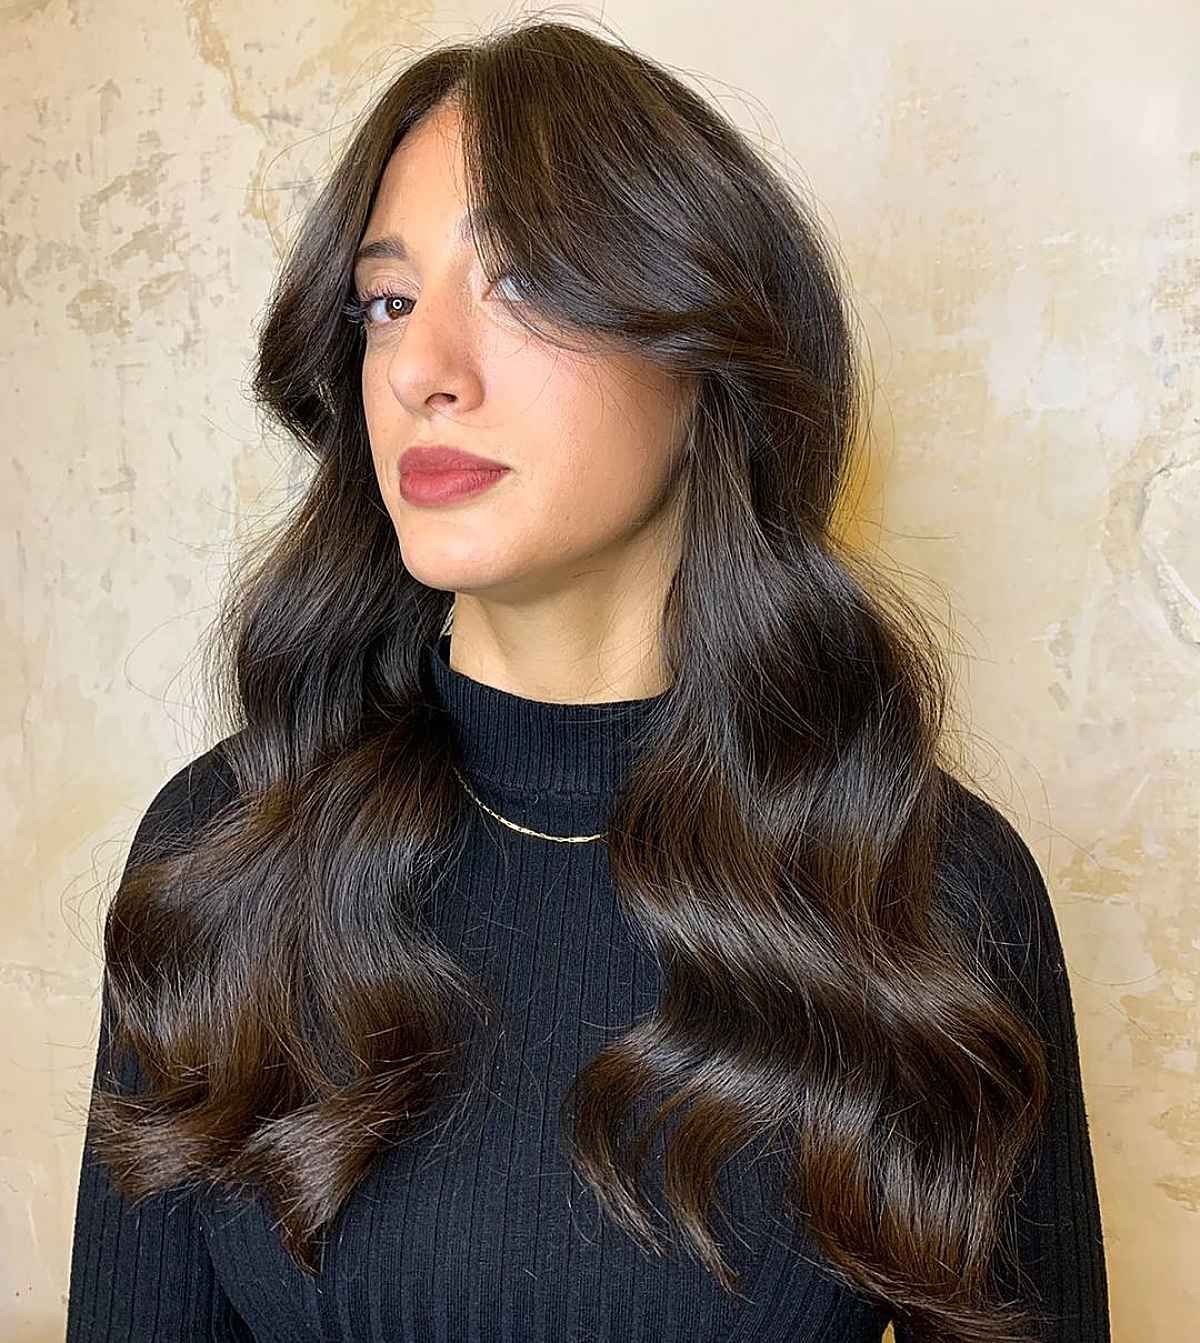 Pairing Curtain Bangs With Wavy Hair? 22 Best Ways To Do It For Widely Used Loose Waves With Unshowy Curtain Bangs (Gallery 6 of 15)